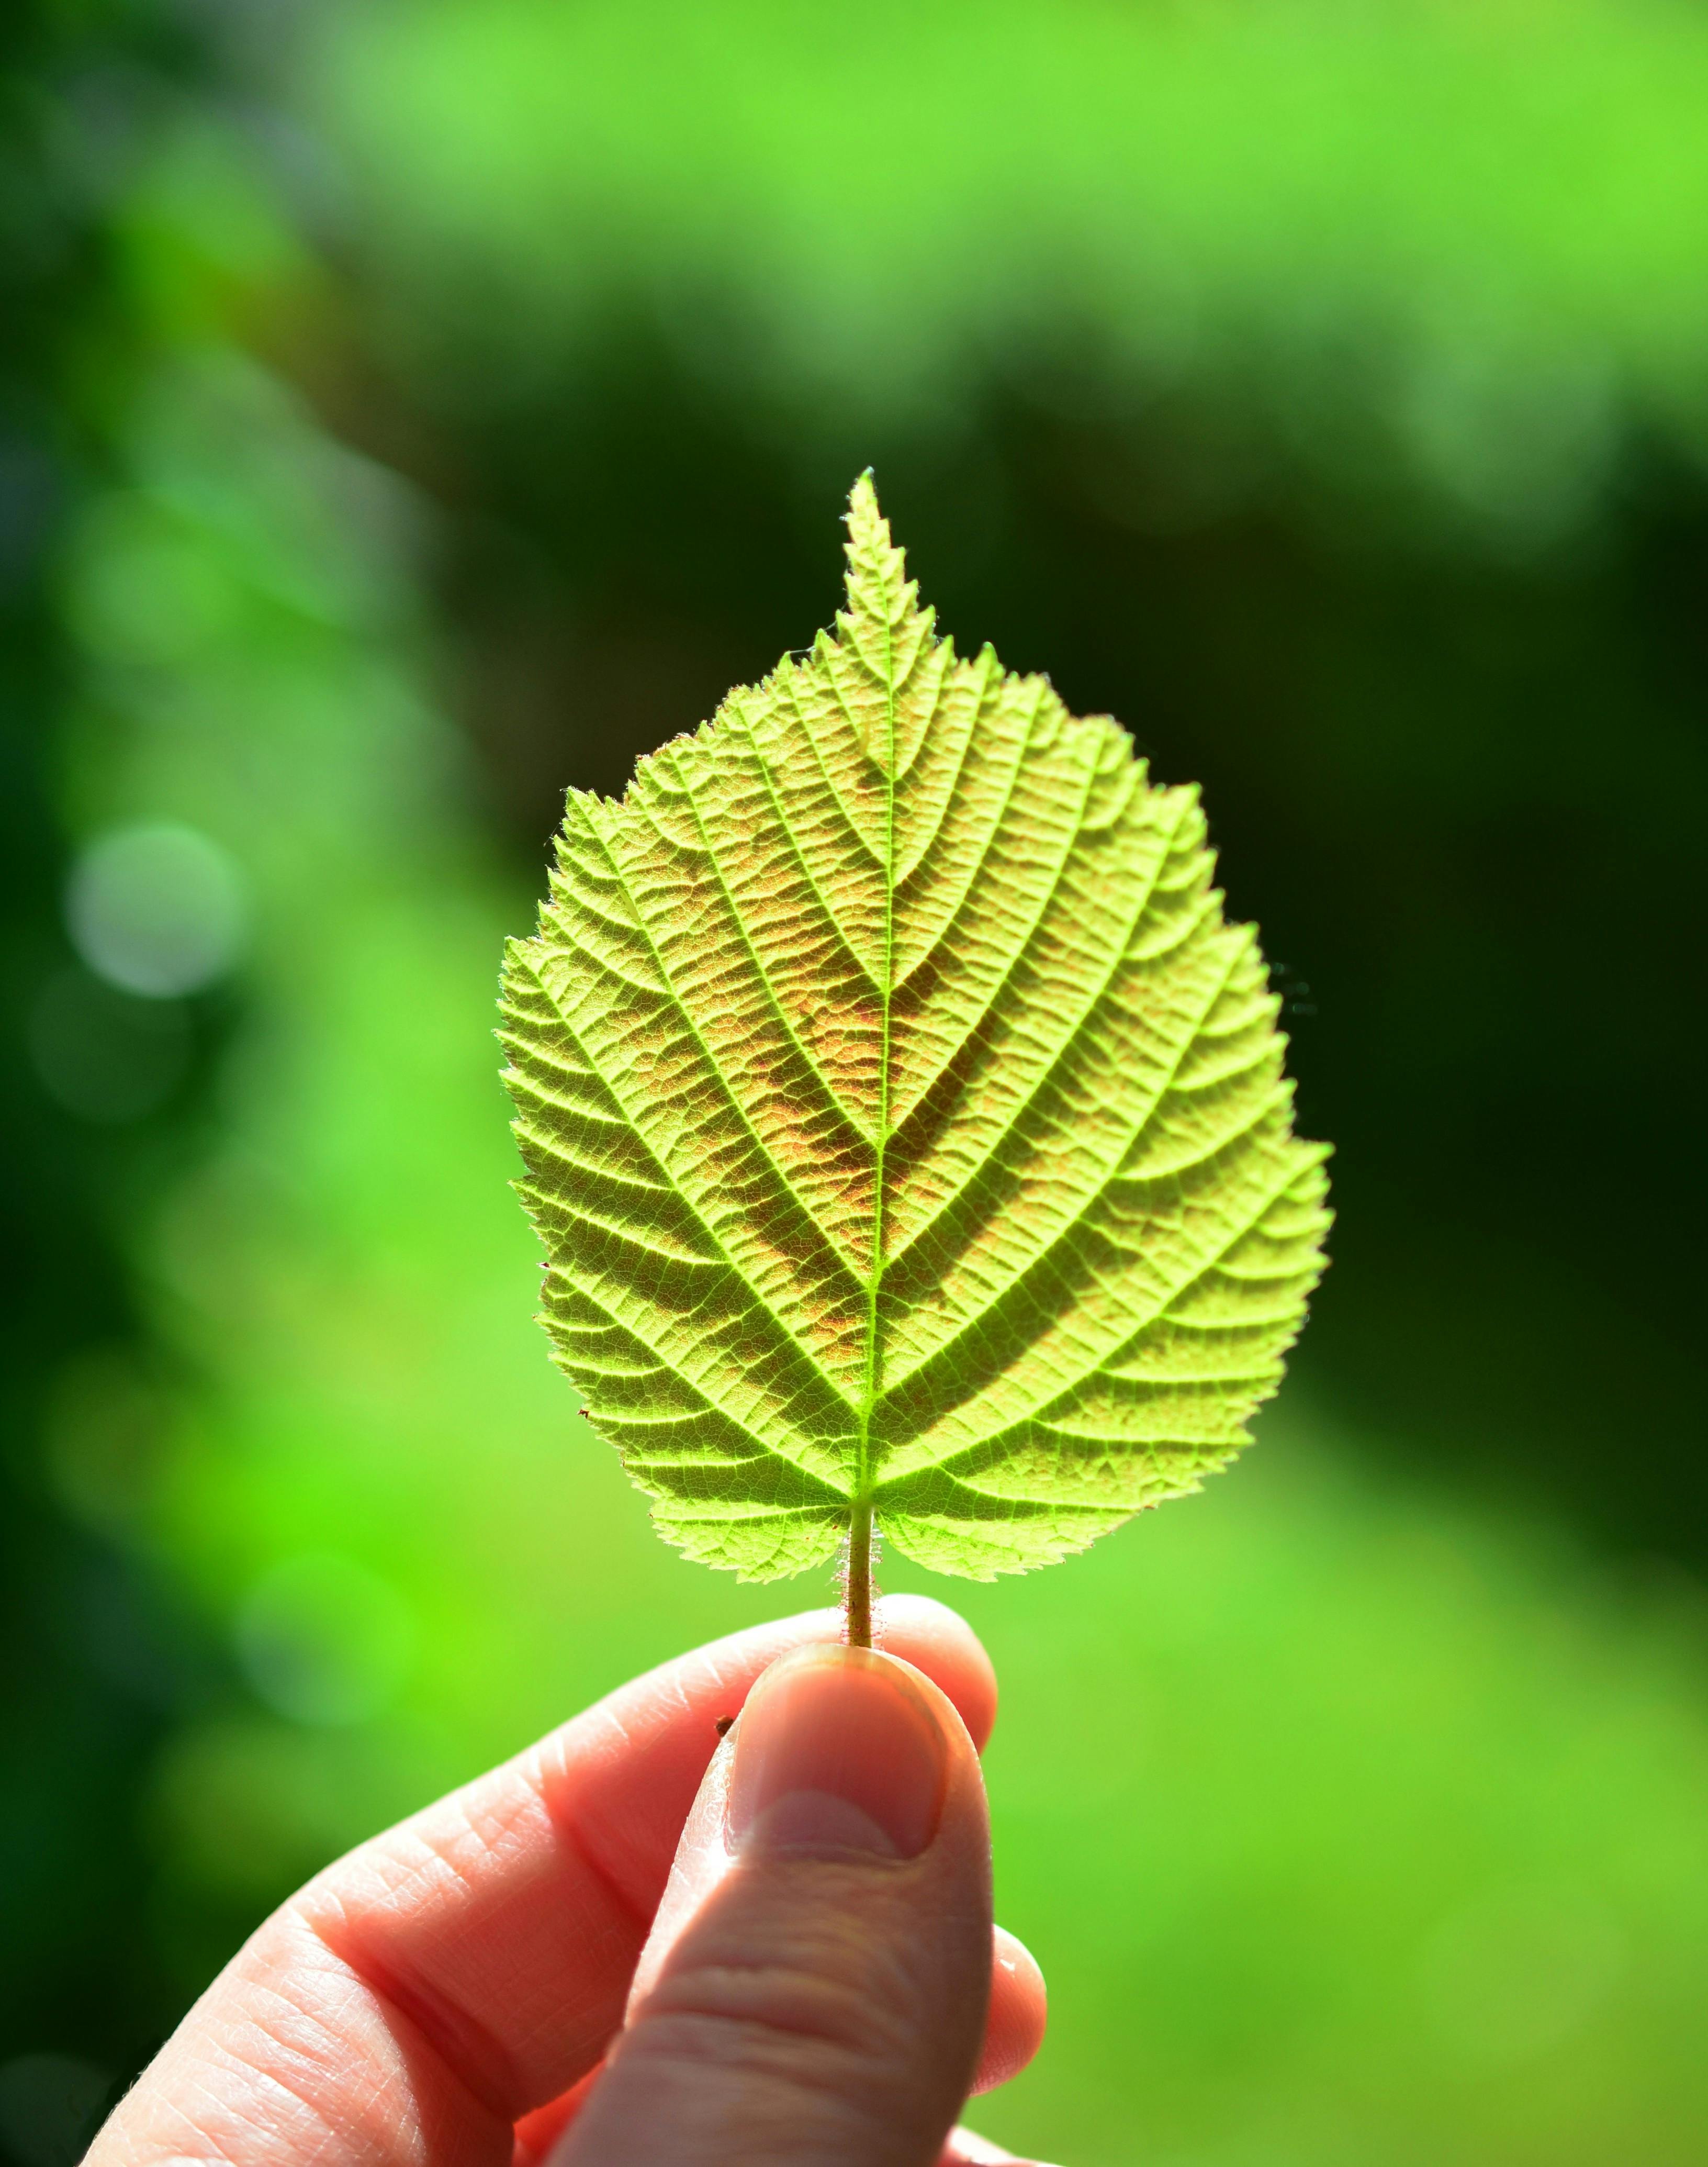 Green Leaf Close-up Photography · Free Stock Photo